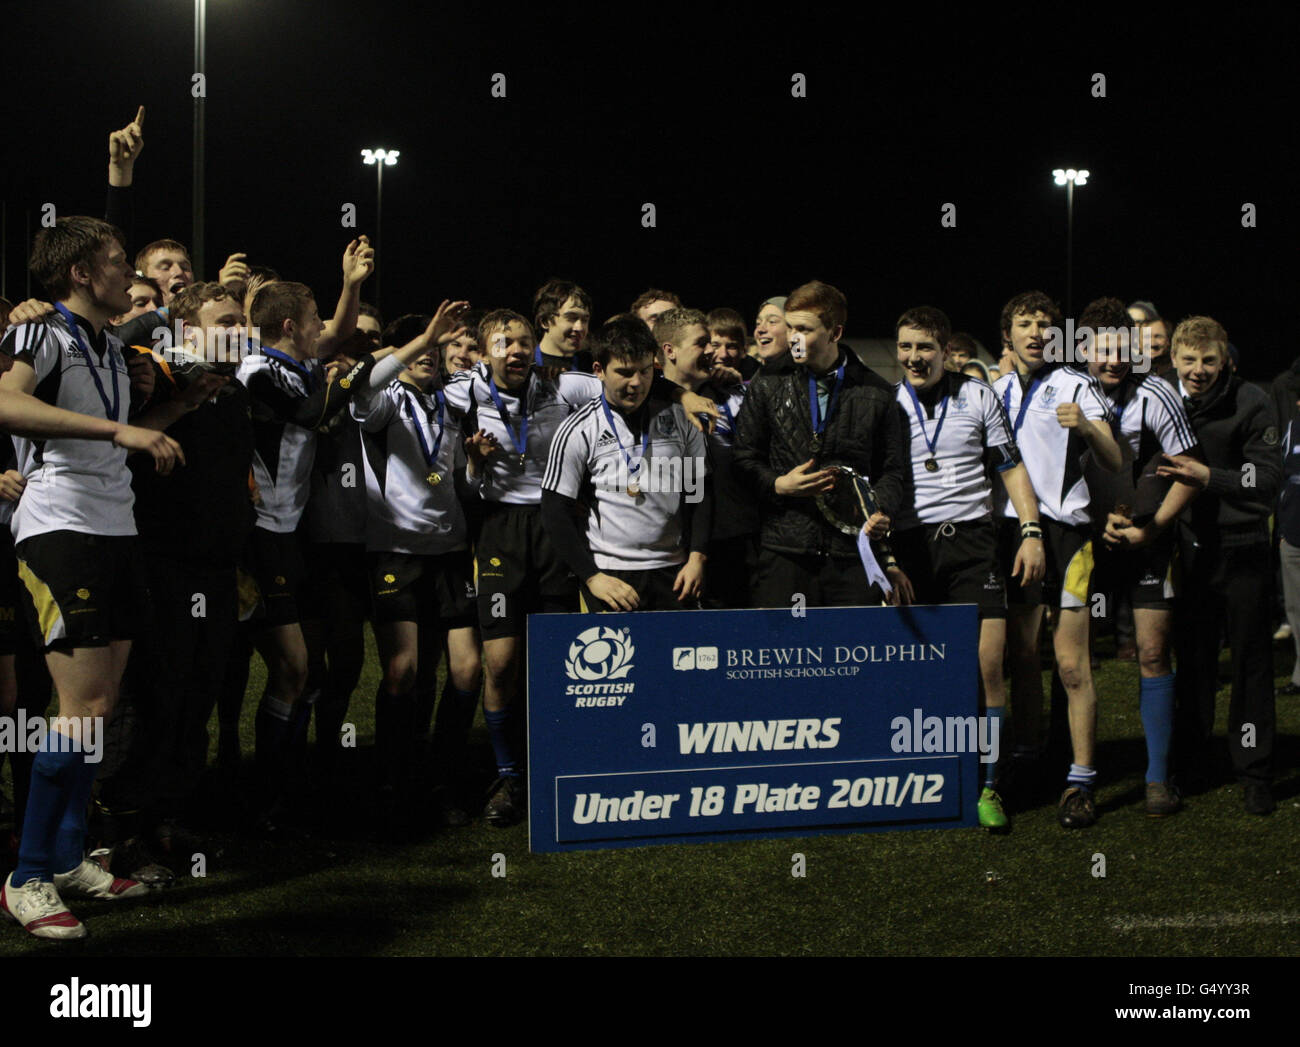 Rugby Union - Brewin Dolphin Plate Finals Day - Under 18 Final - Carrick v Earlston - Murrayfield Stadium. Earlston celebrate winning the Brewin Dolphin Plate u18 Final at Murrayfield Stadium, Edinburgh. Stock Photo